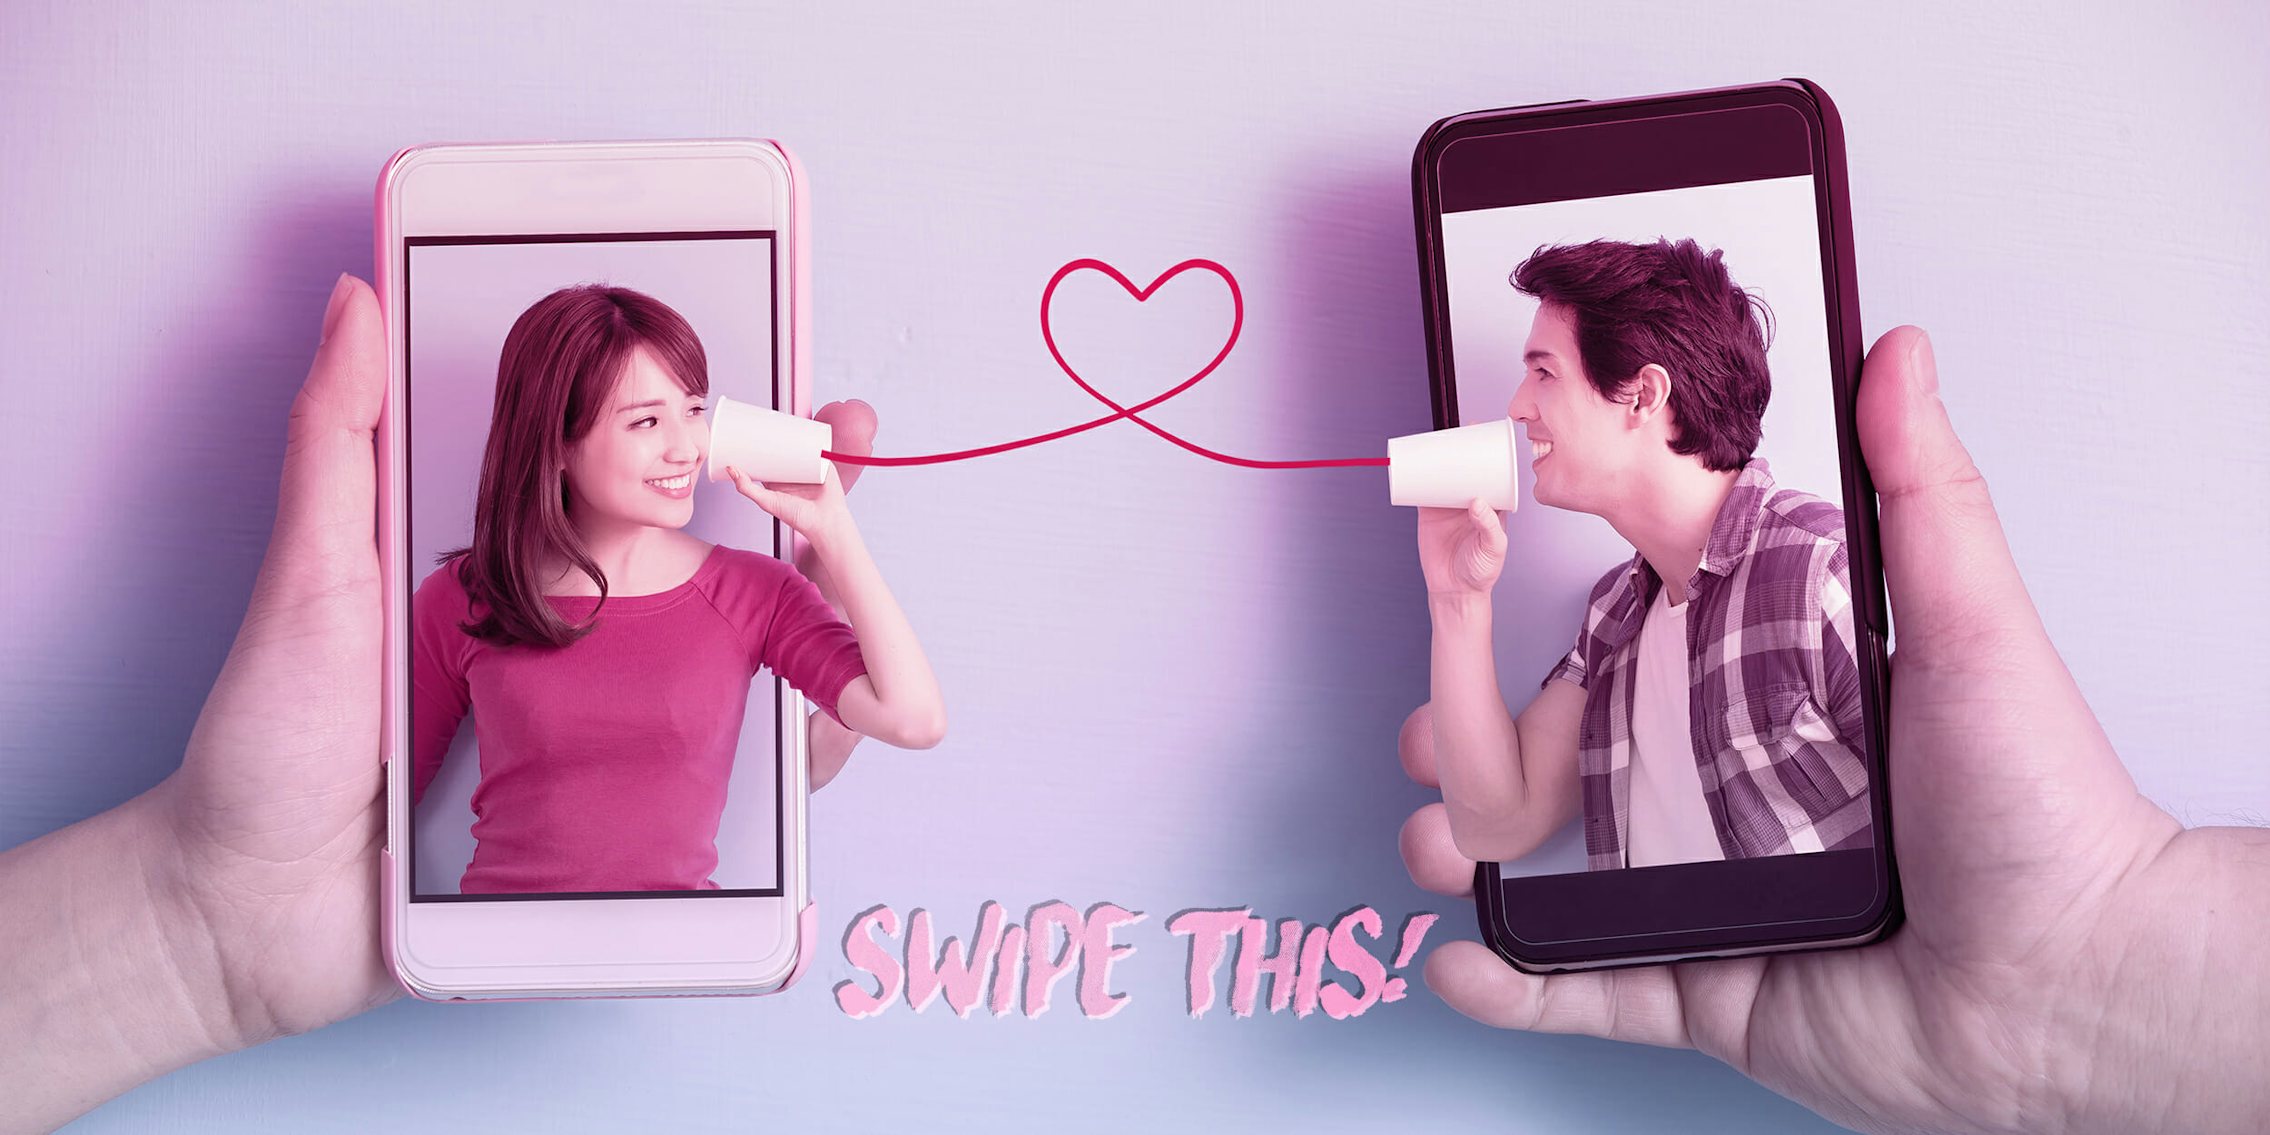 Couple talking to each other with cup and string with a heart in the middle, from one phone to another